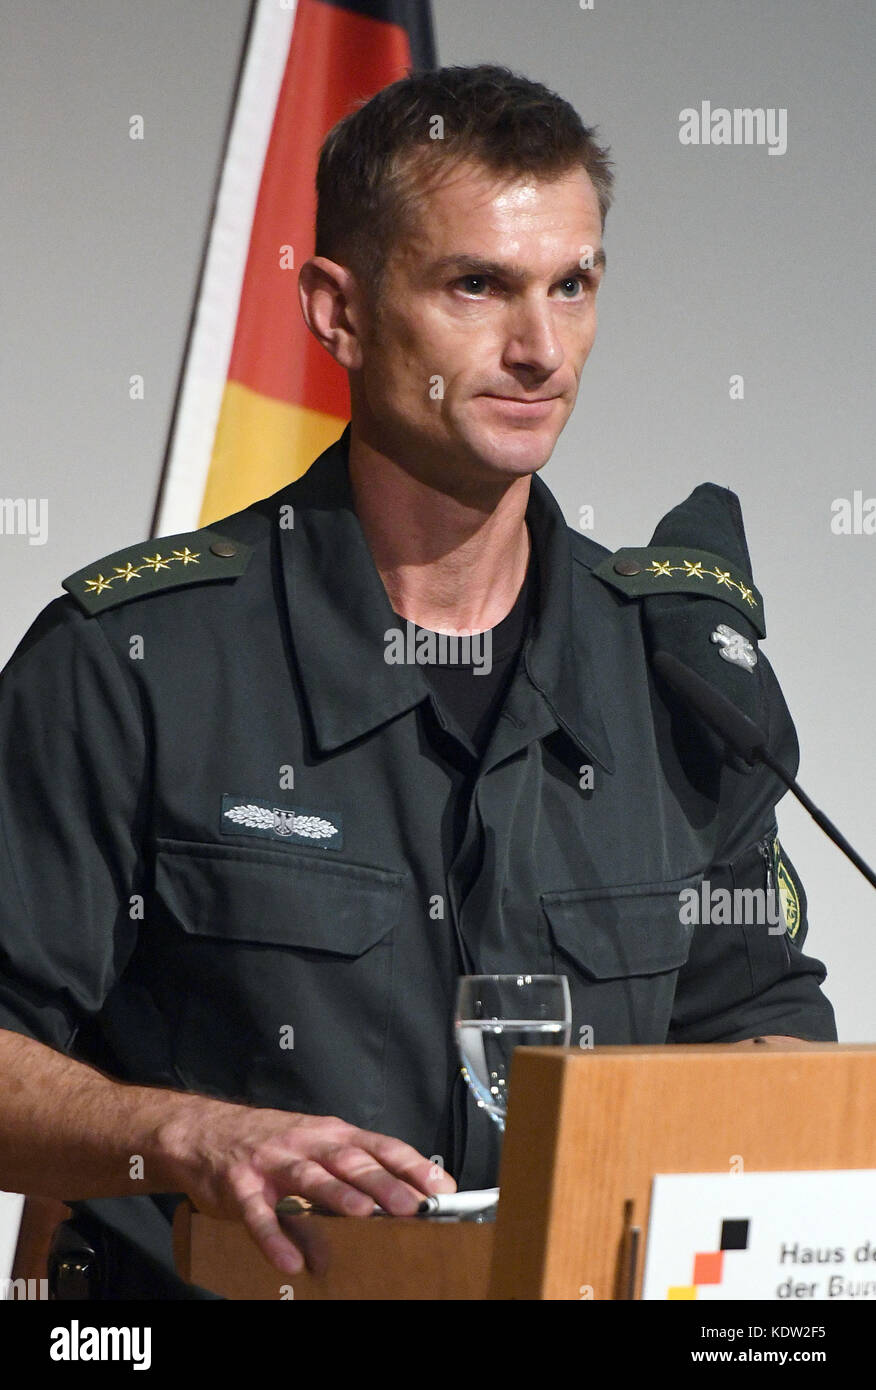 The commander of the GSG 9, Jerome Fuchs, speaks on stage during the  ceremony of the elite Police Tactical Unit GSG 9 of the German Federal  Police on the occasion of the